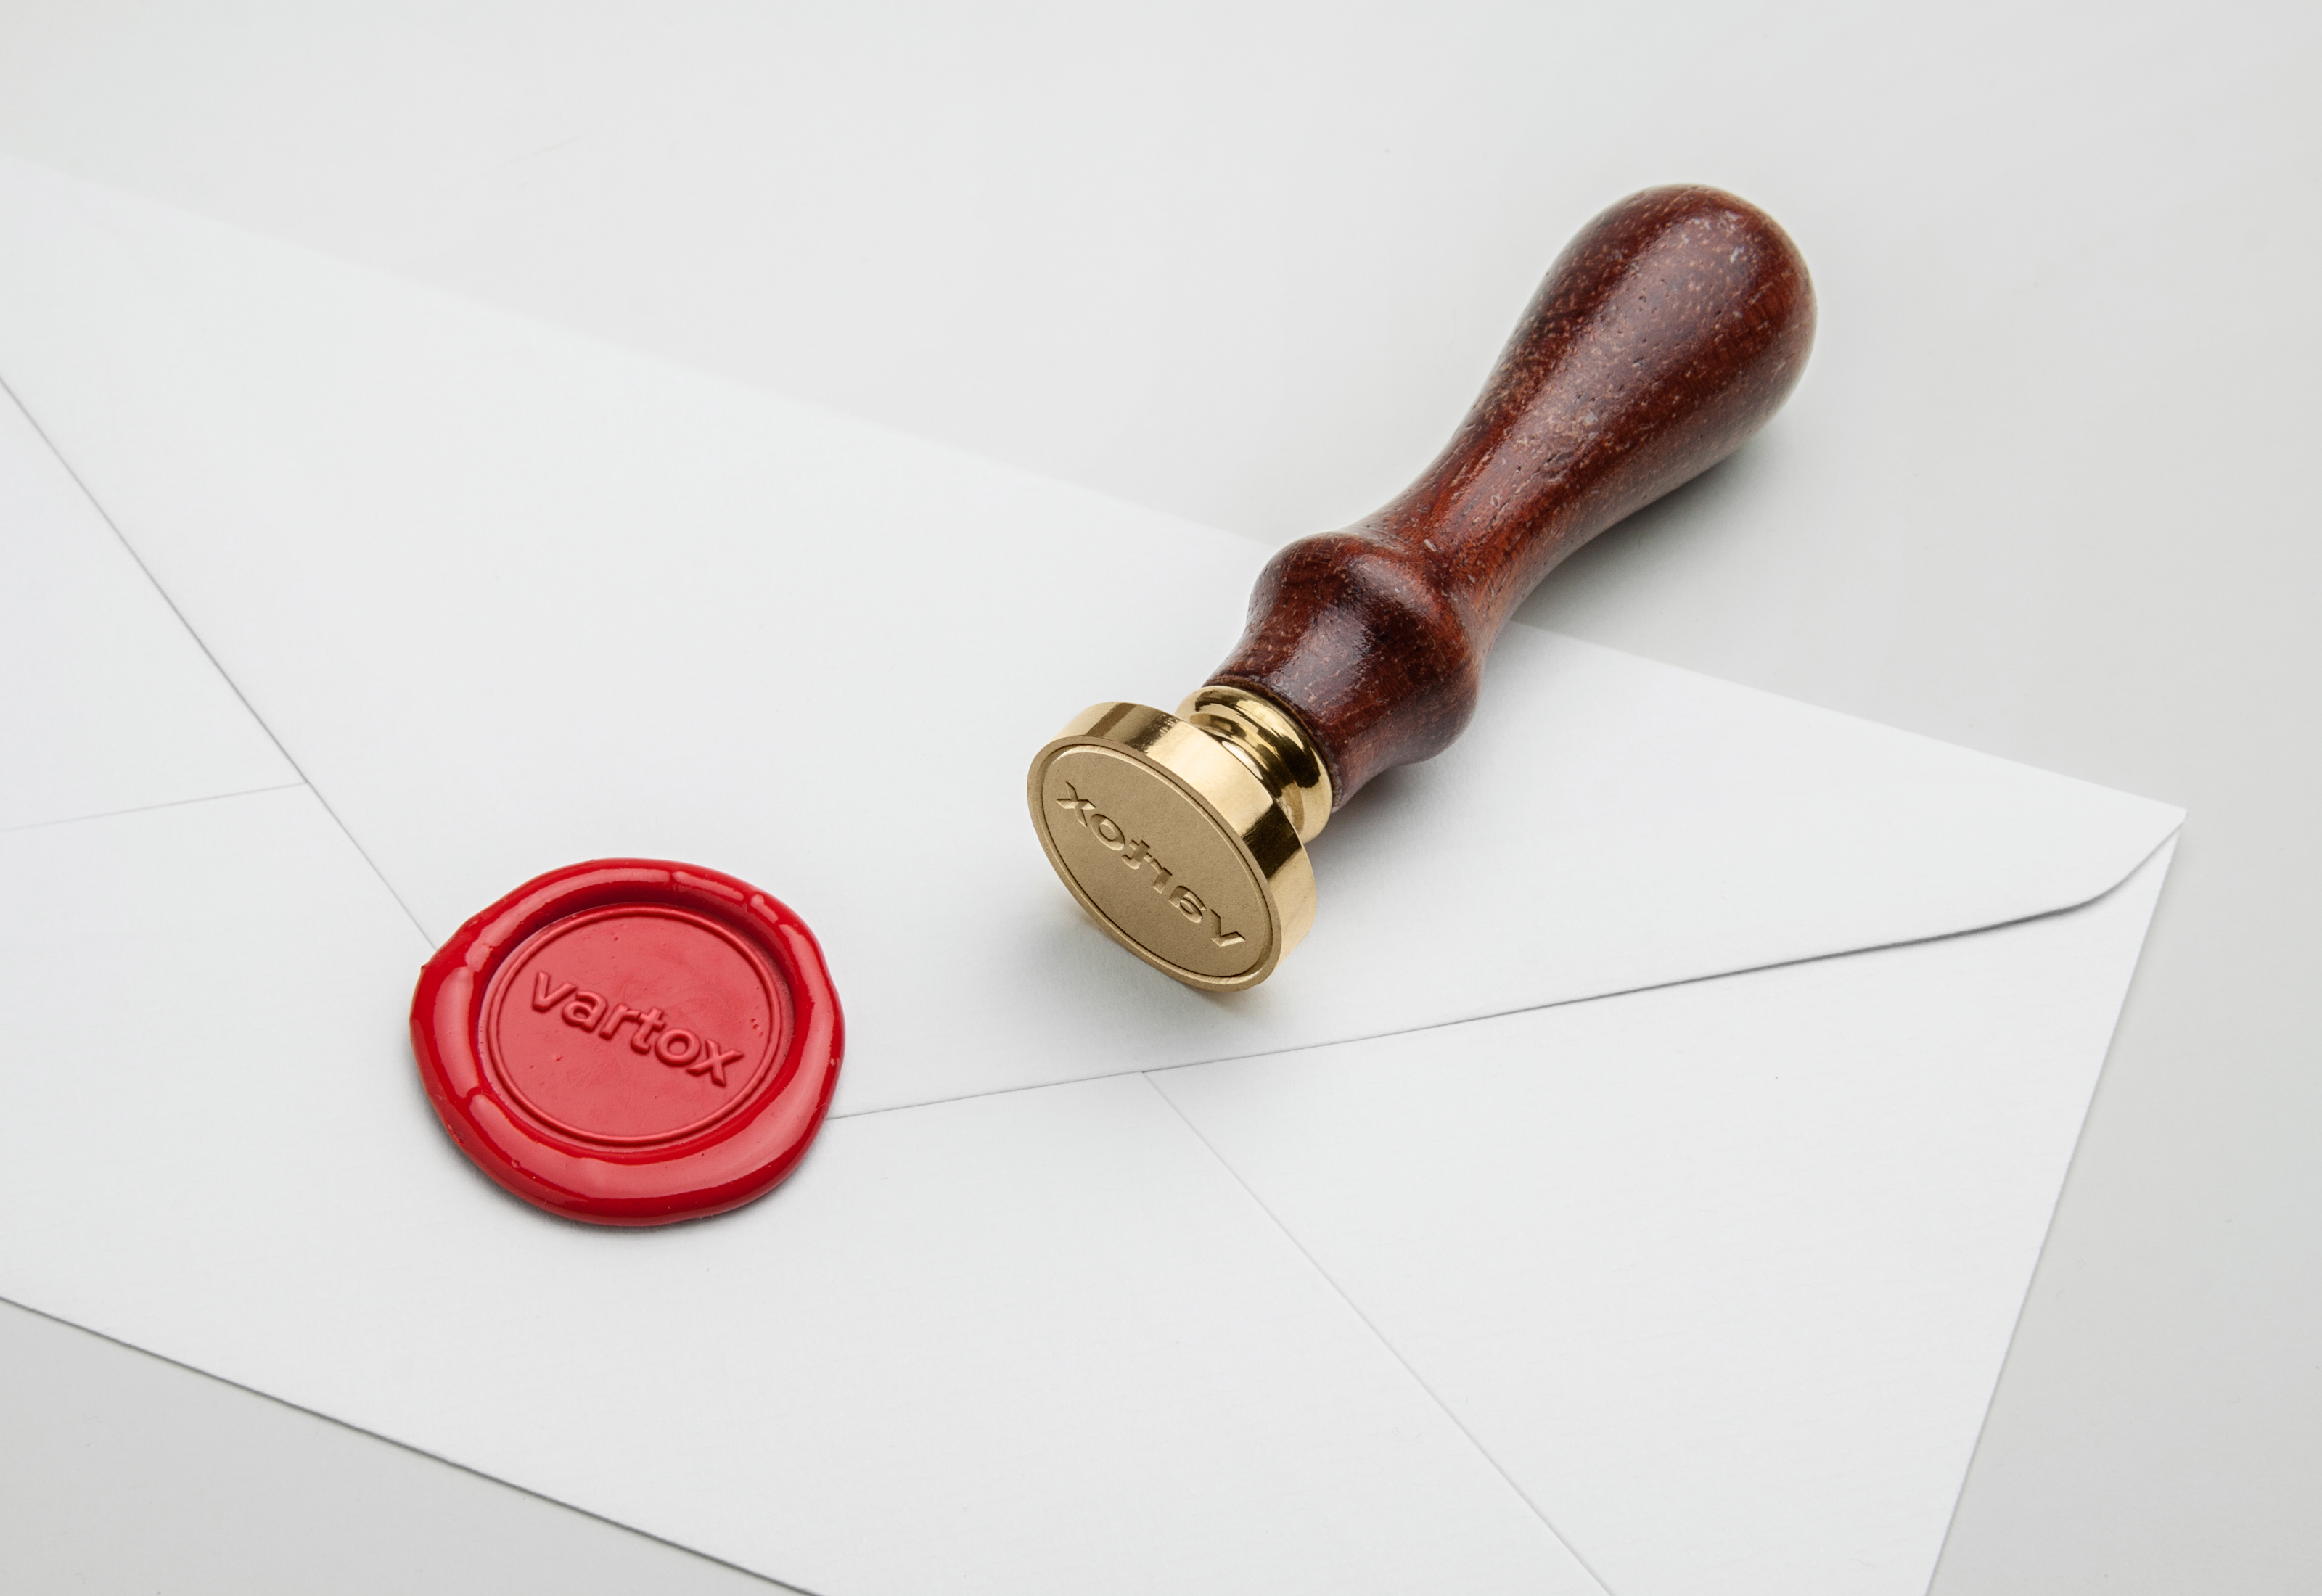 I Will Do a Wax Seal Design With Stamp With Your Logo